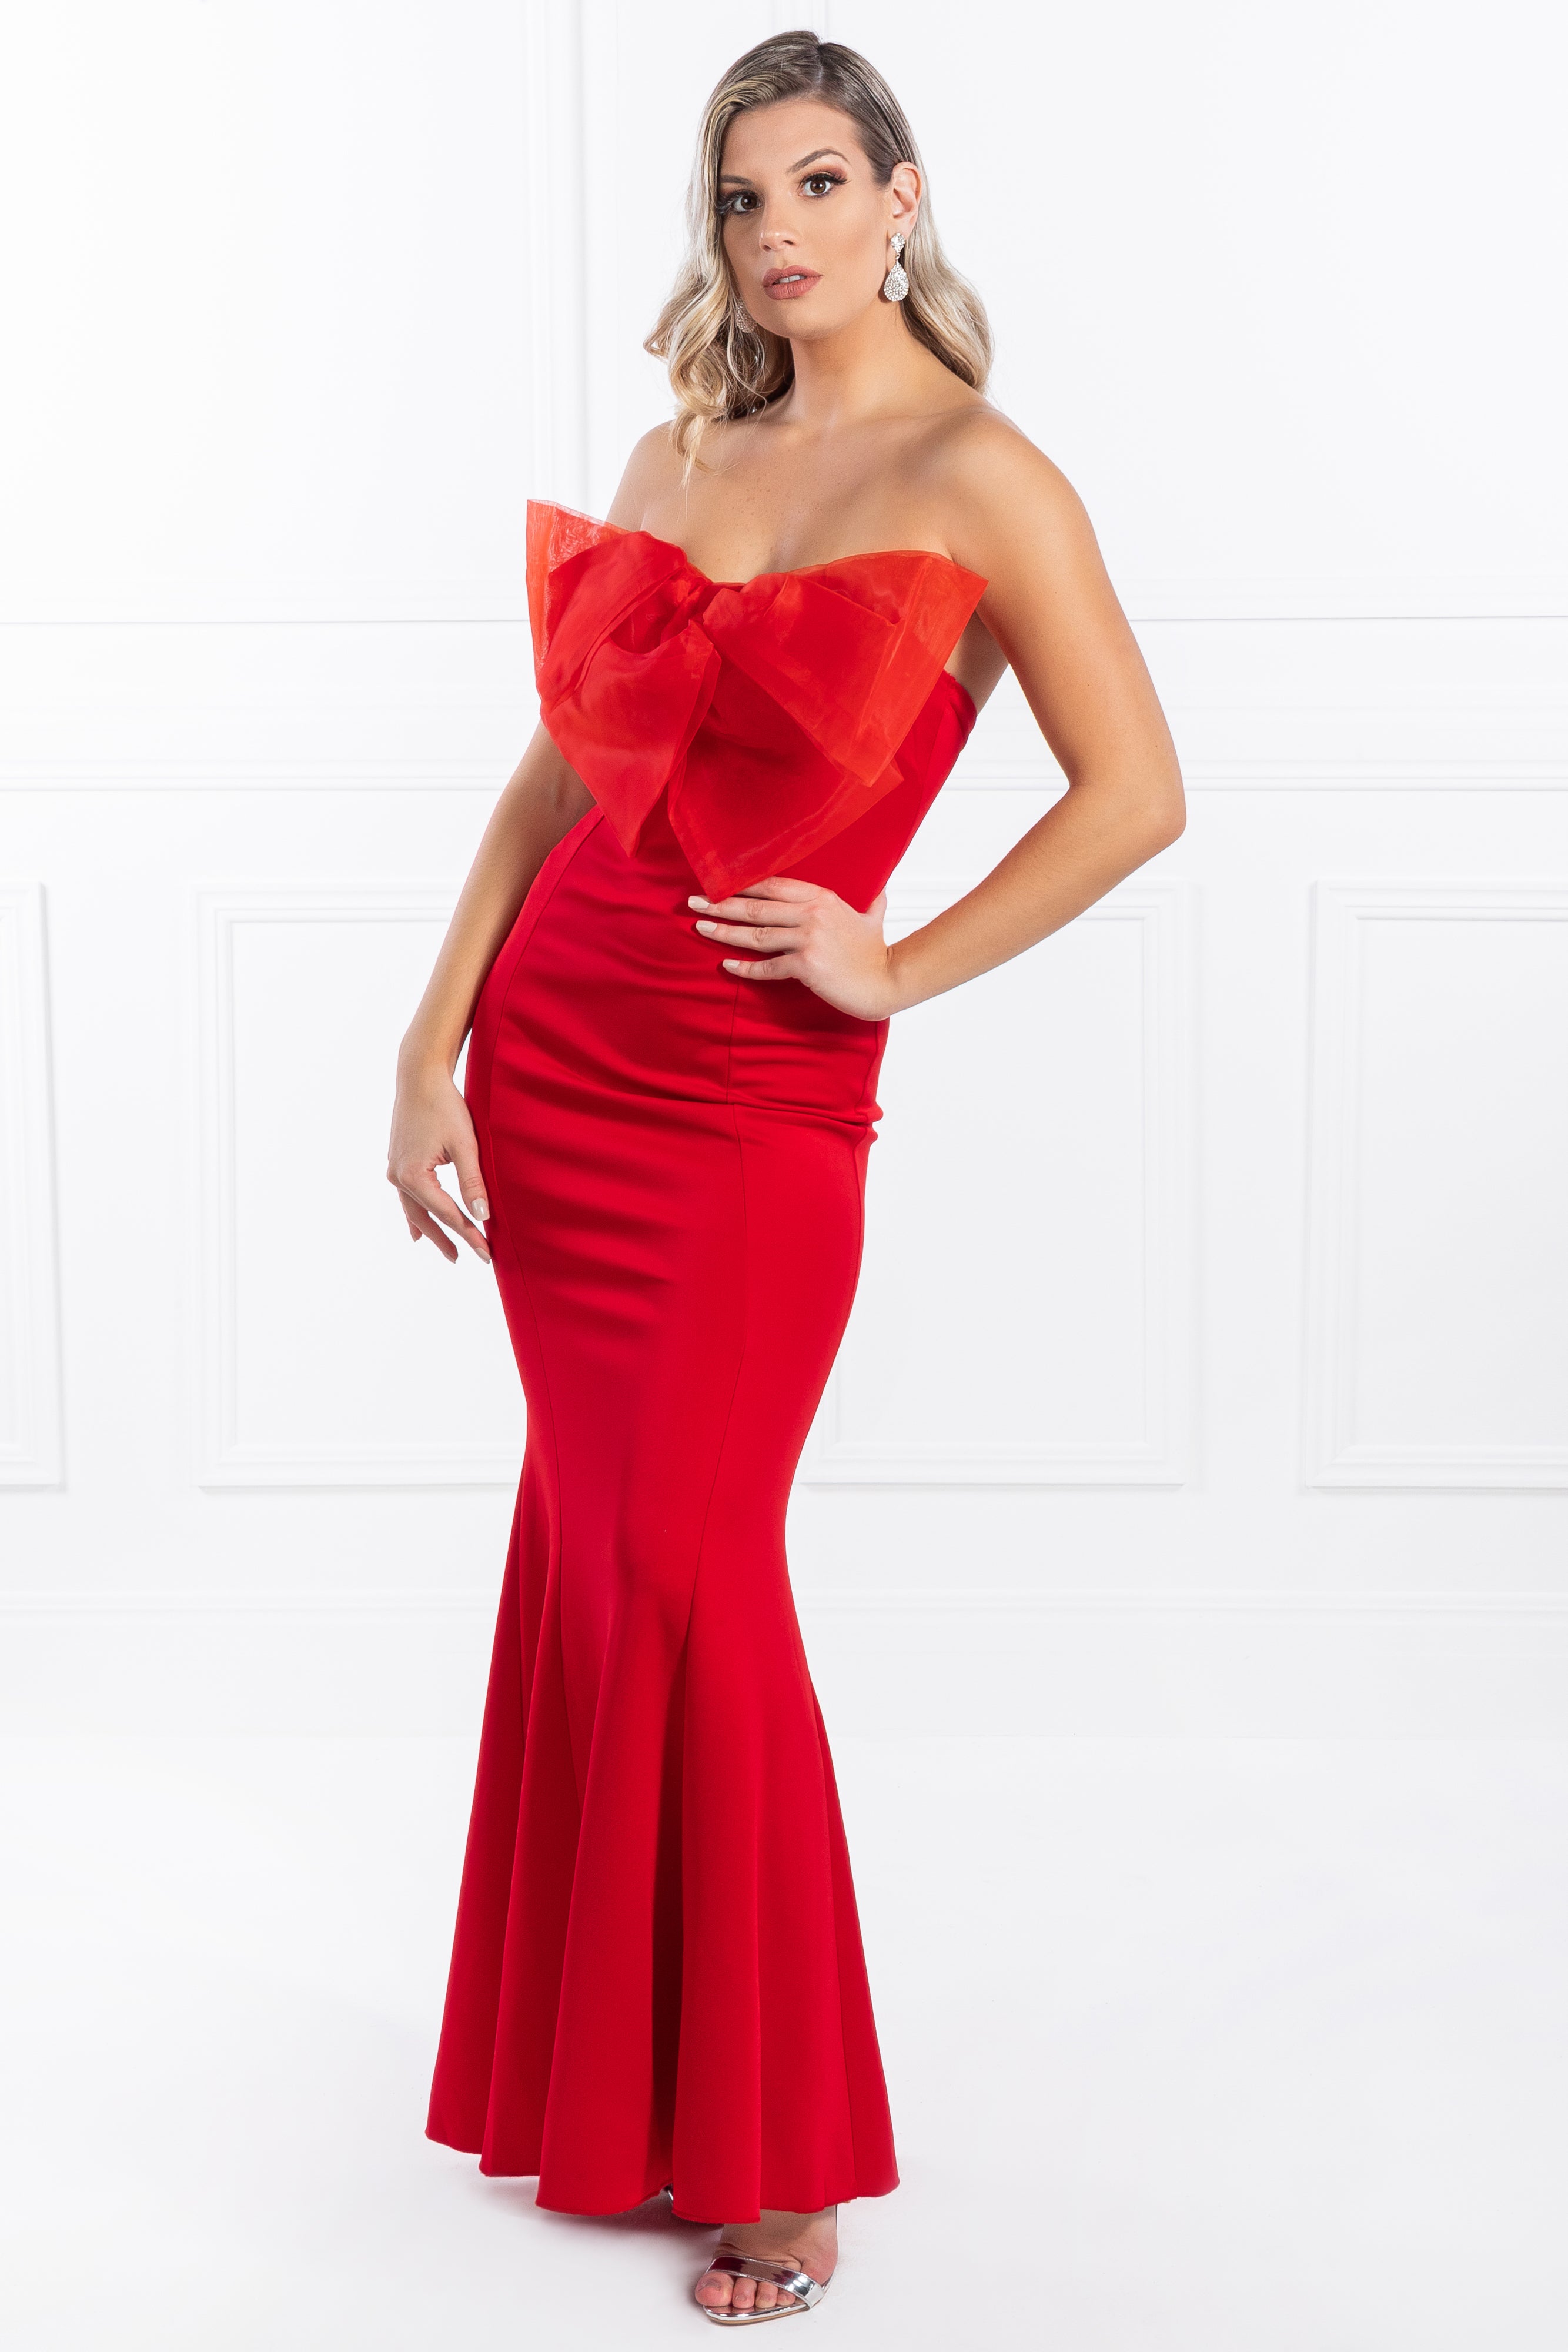 Honey Couture FREJA Red Bow Strapless Evening Gown Dress